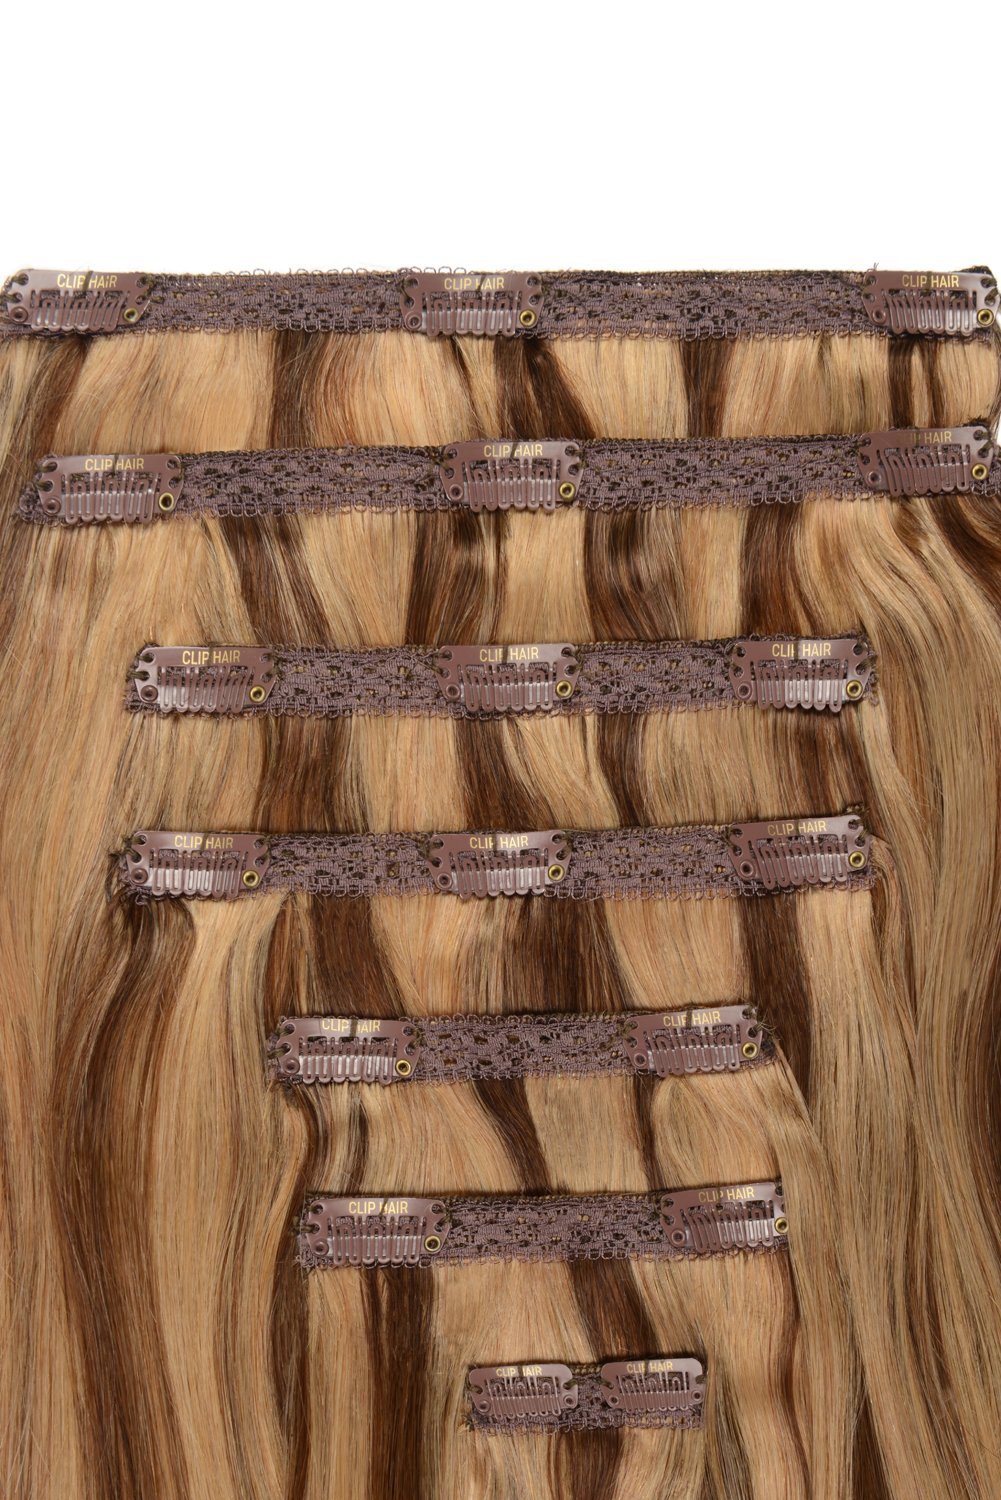 Double Wefted Full Head Remy Clip in Human Hair Extensions - Brown/Ginger Blonde Mix (#6/27) Double wefted full head cliphair 